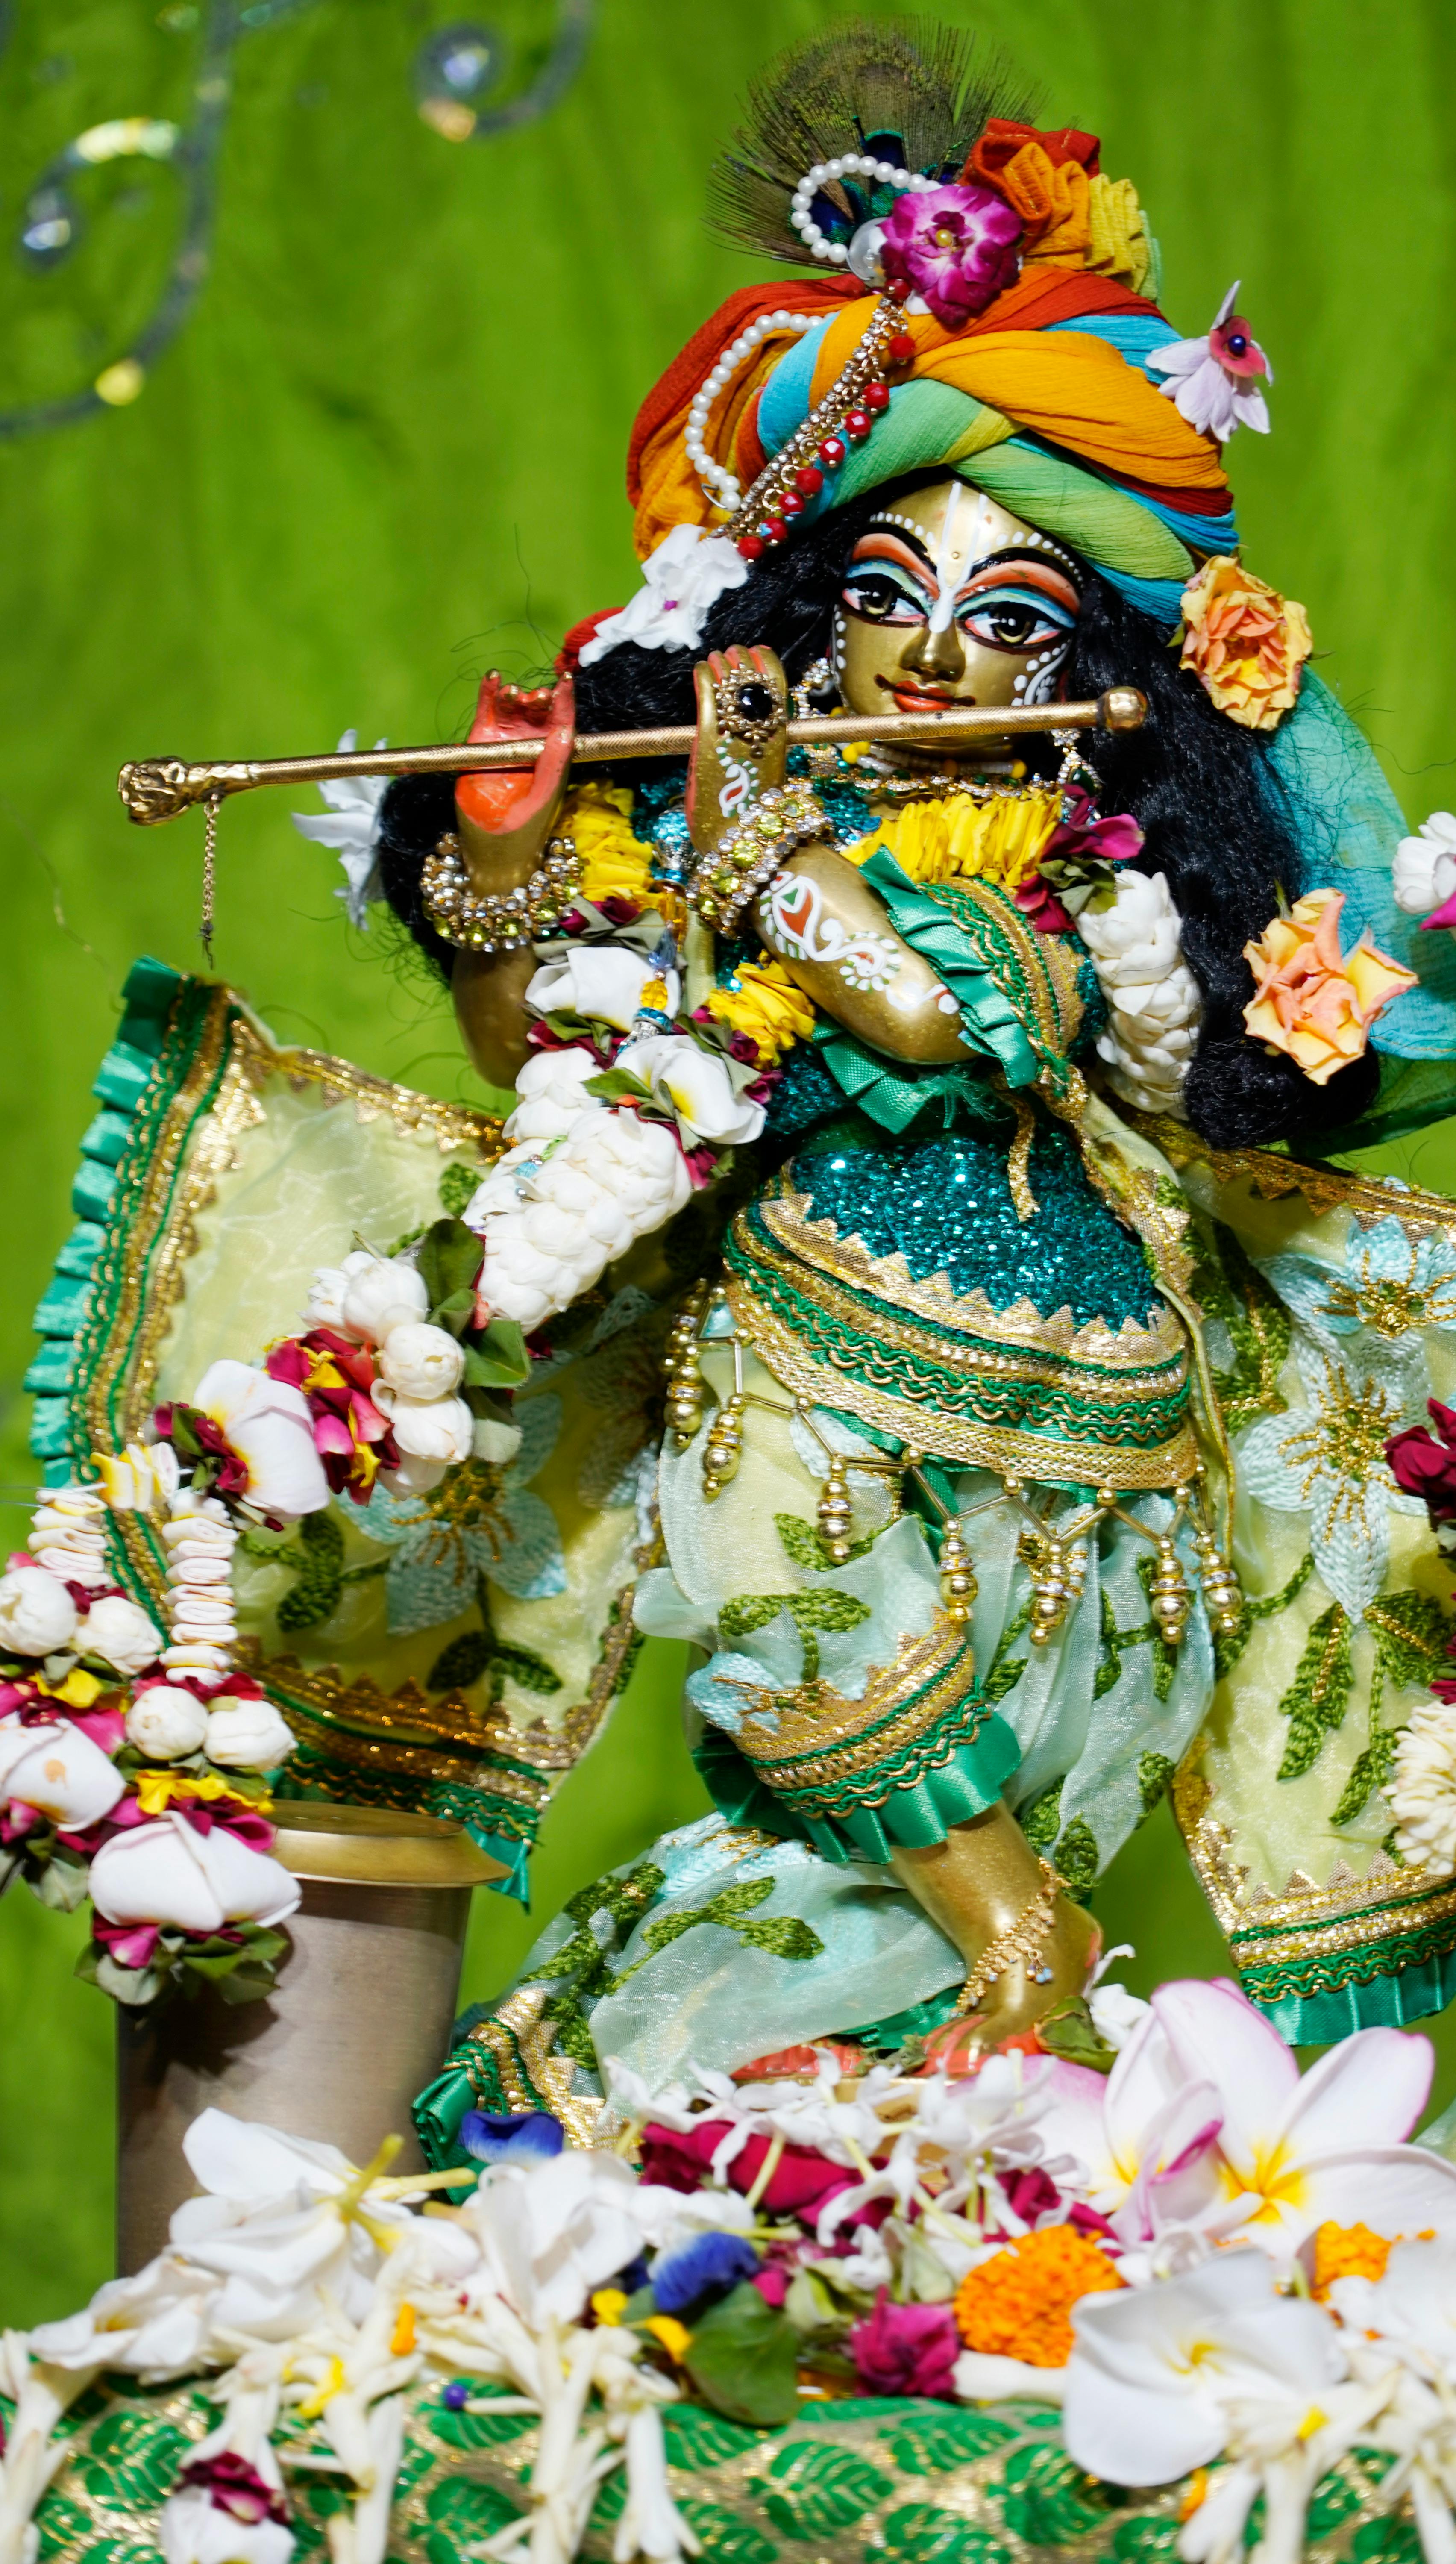 Lord Krishna 6K HD Wallpaper, Radha Madhav Images For Smartphones and Iphone